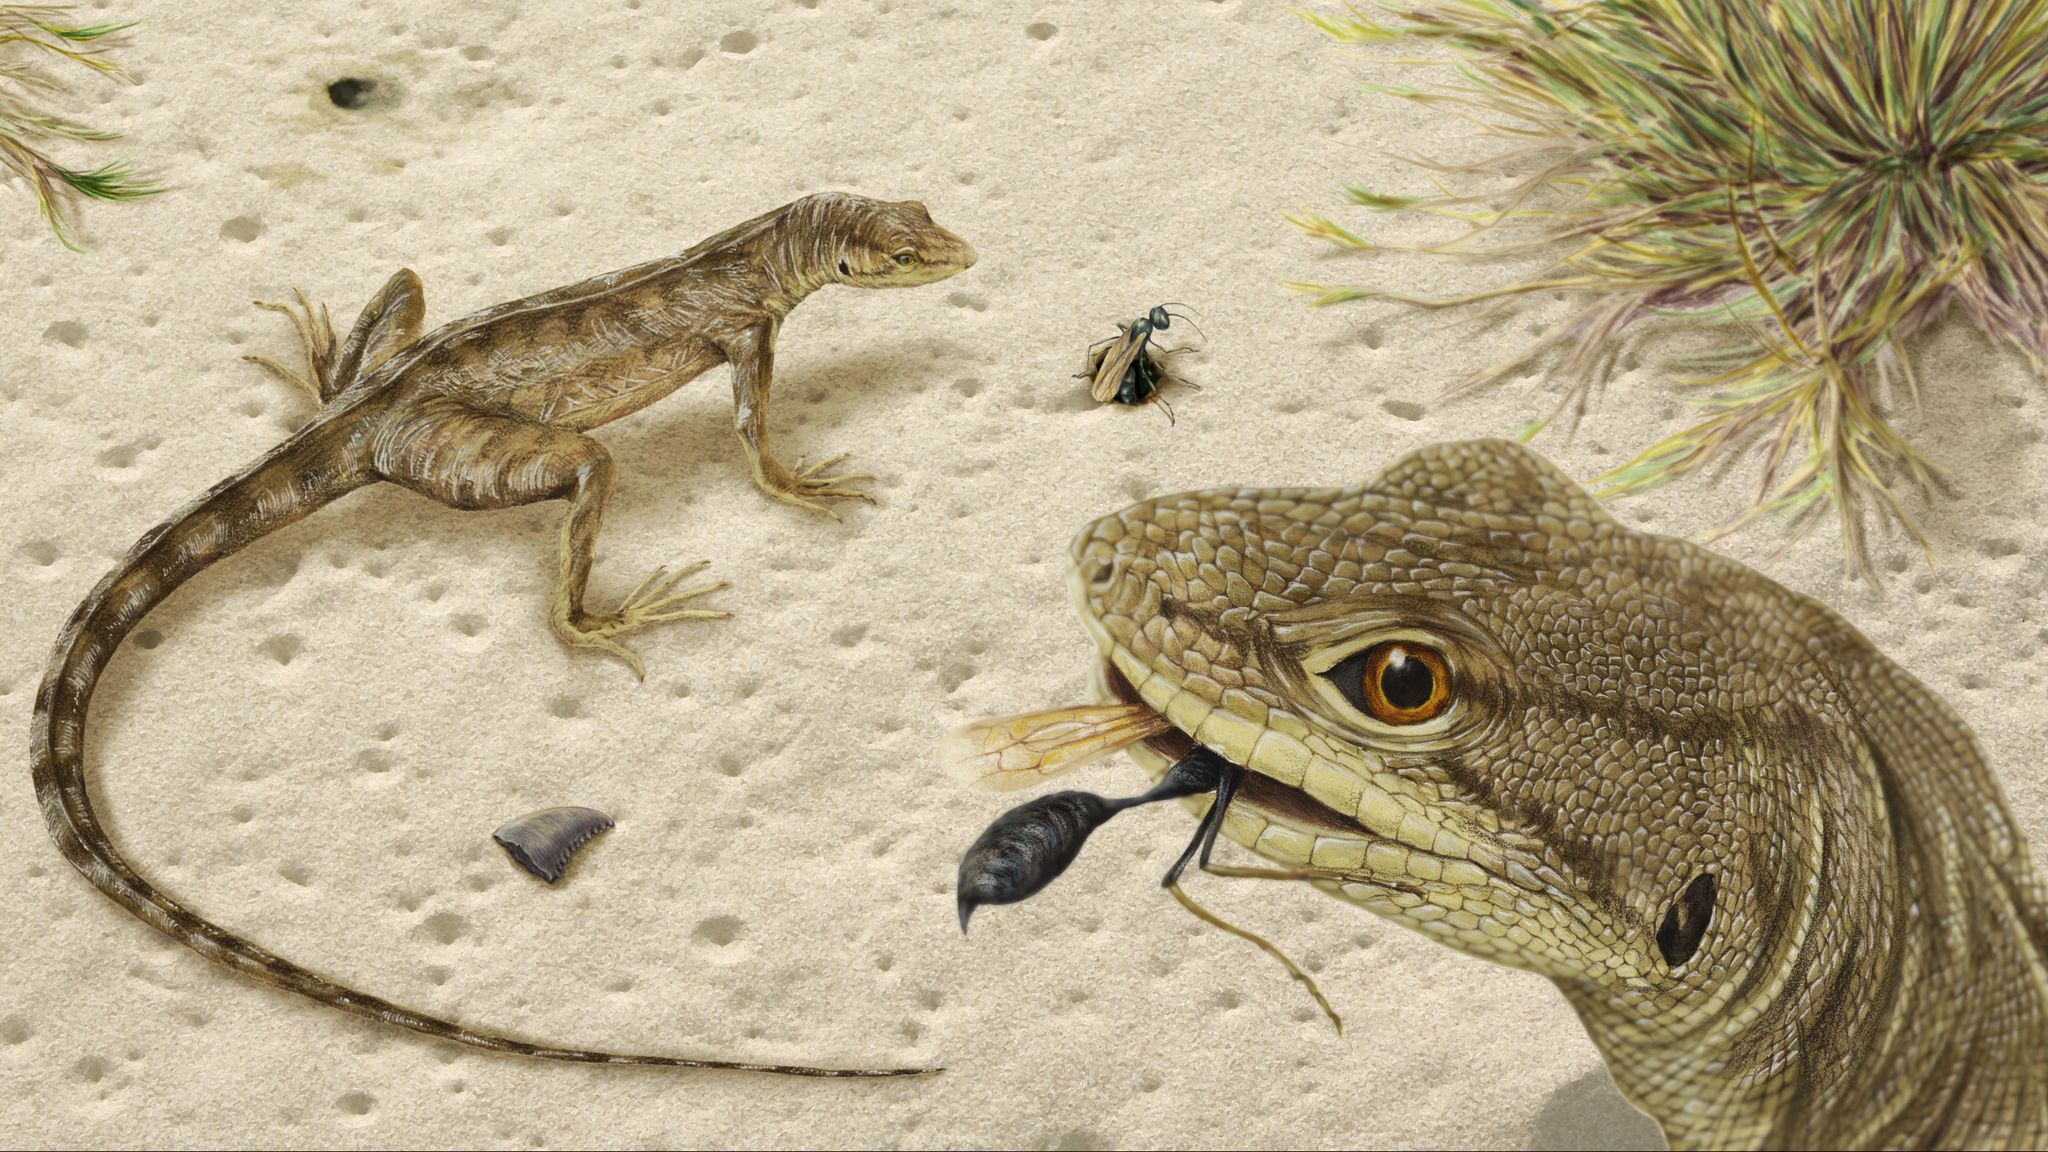 Fossil hunters discover an ancient iguana that lived in a dinosaur ...